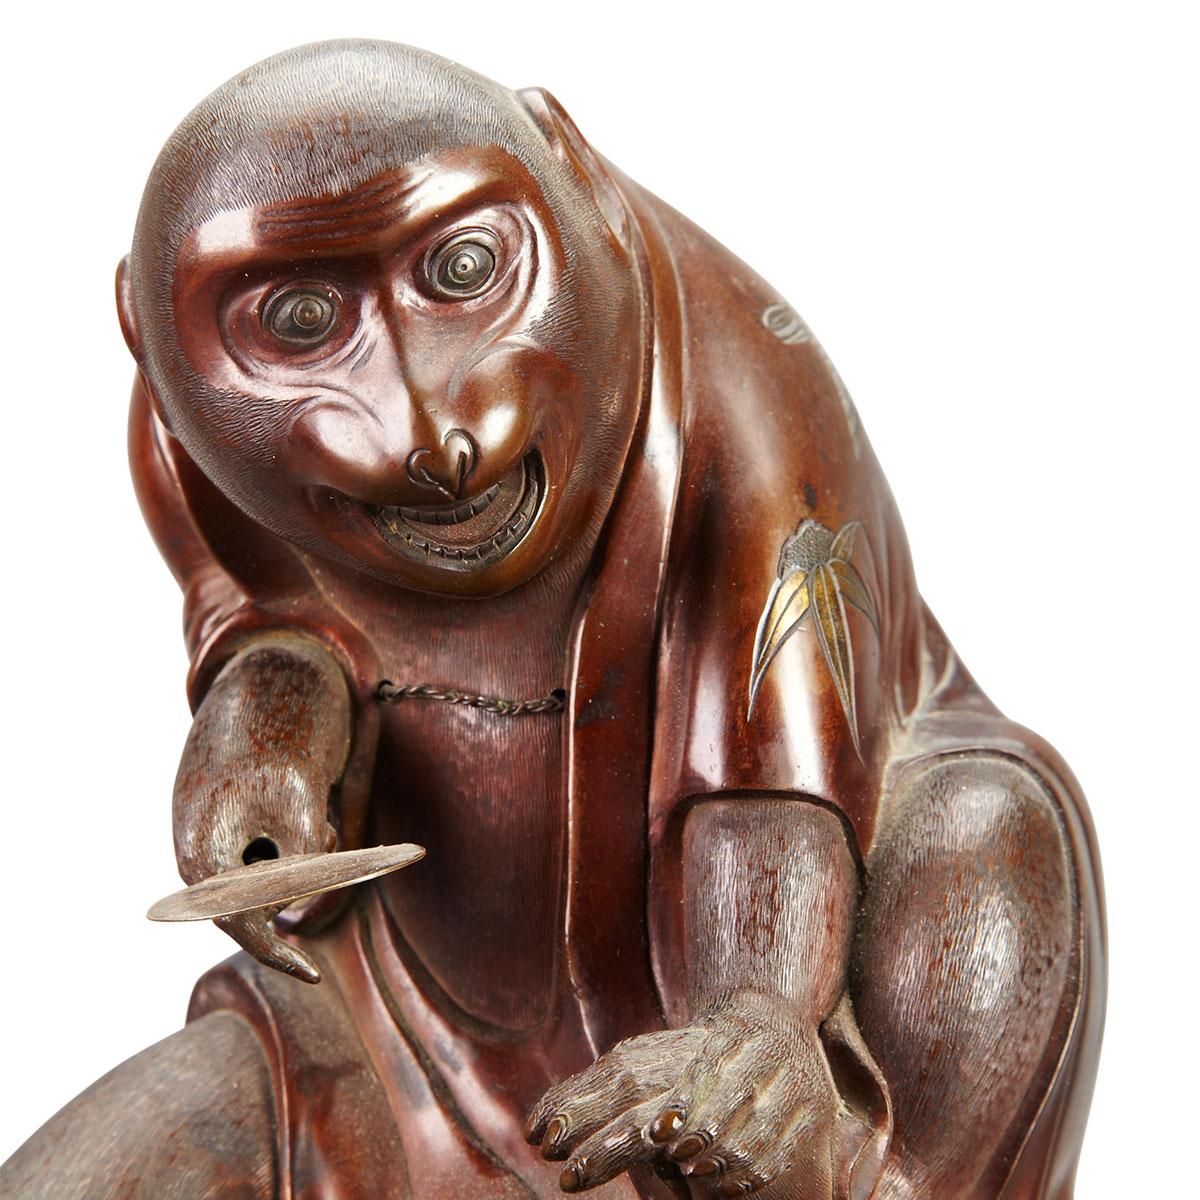 Bronze Monkey Censer and Cover, 19th Century